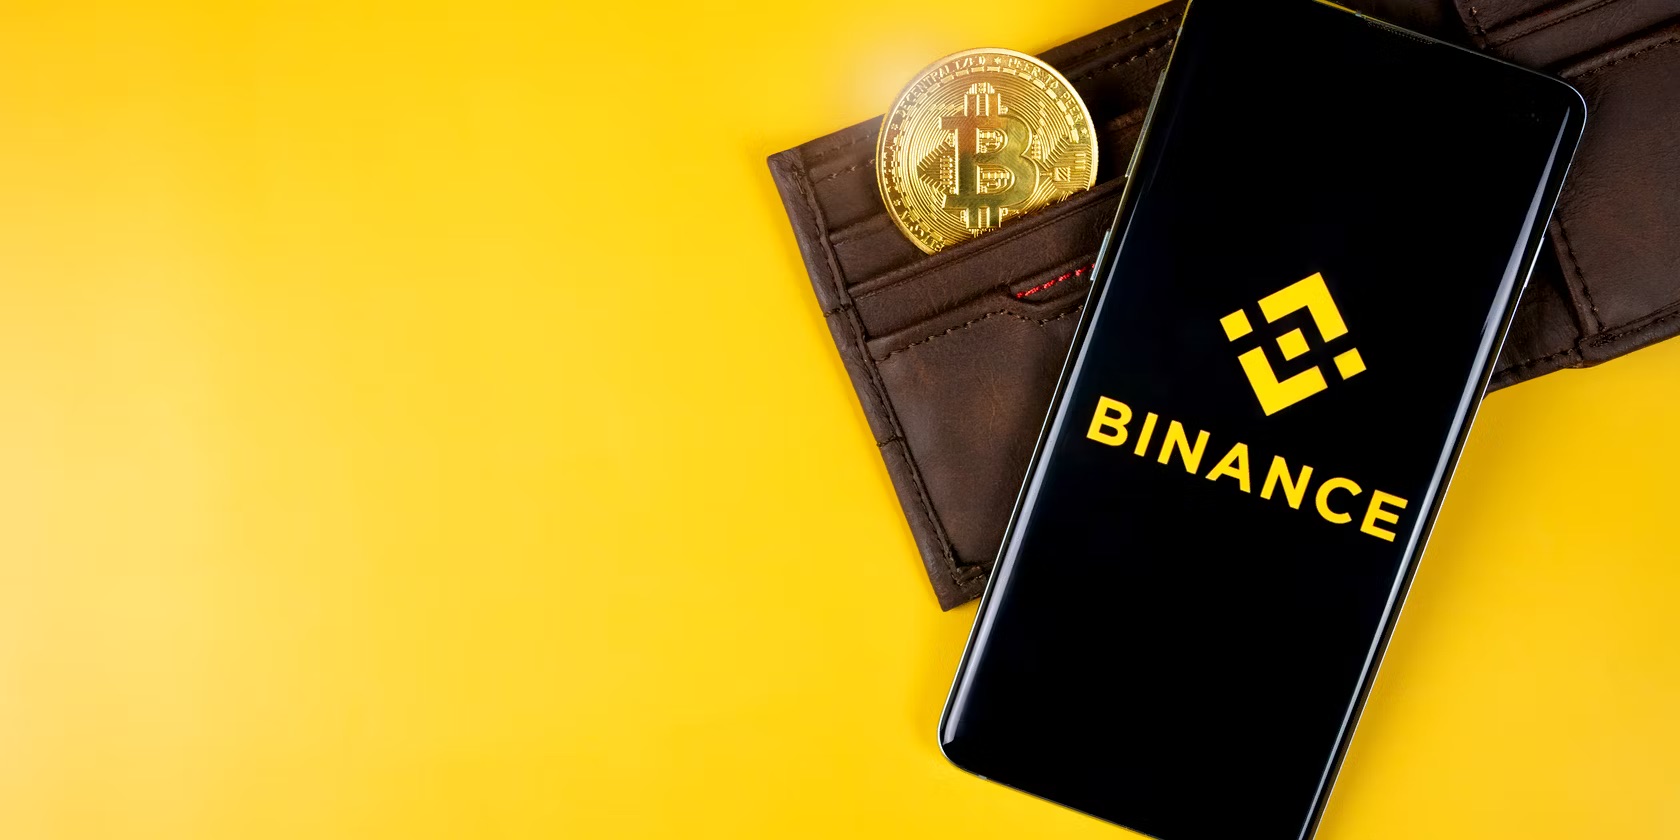 Binance Encourages Participation from Small to Medium Projects to Address Low Circulation and High Valuation Challenges